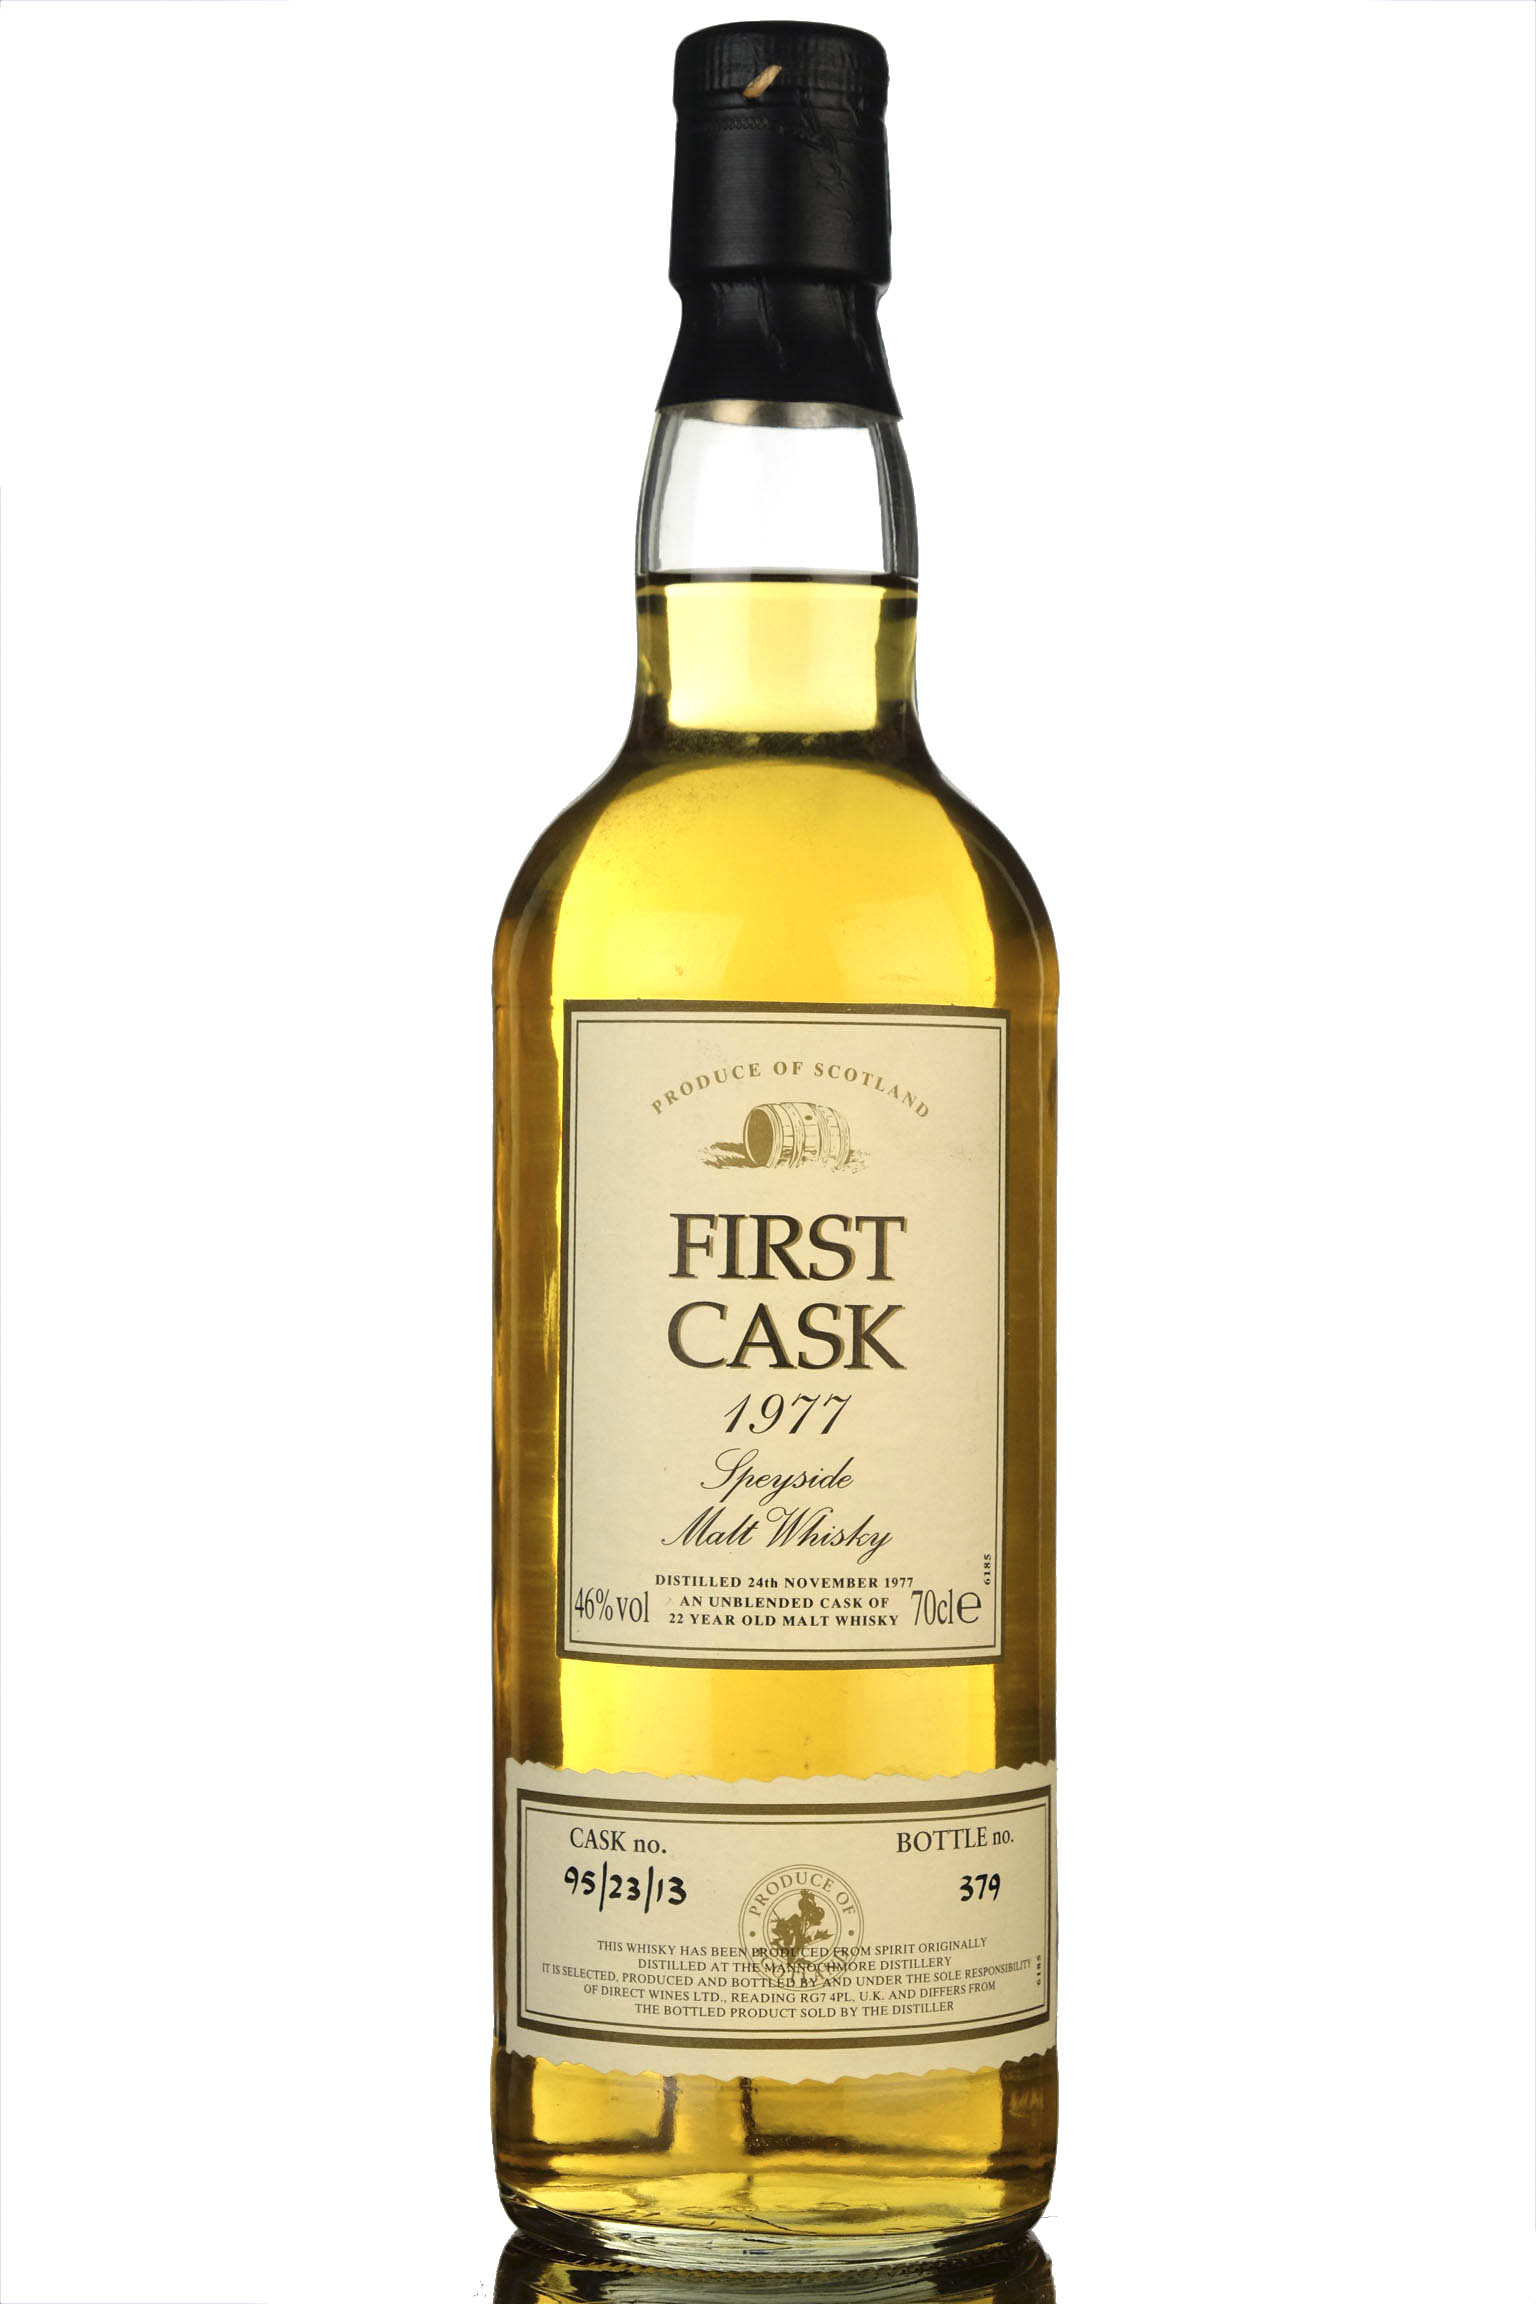 Mannochmore 1977 - 22 Year Old - First Cask 95/23/13